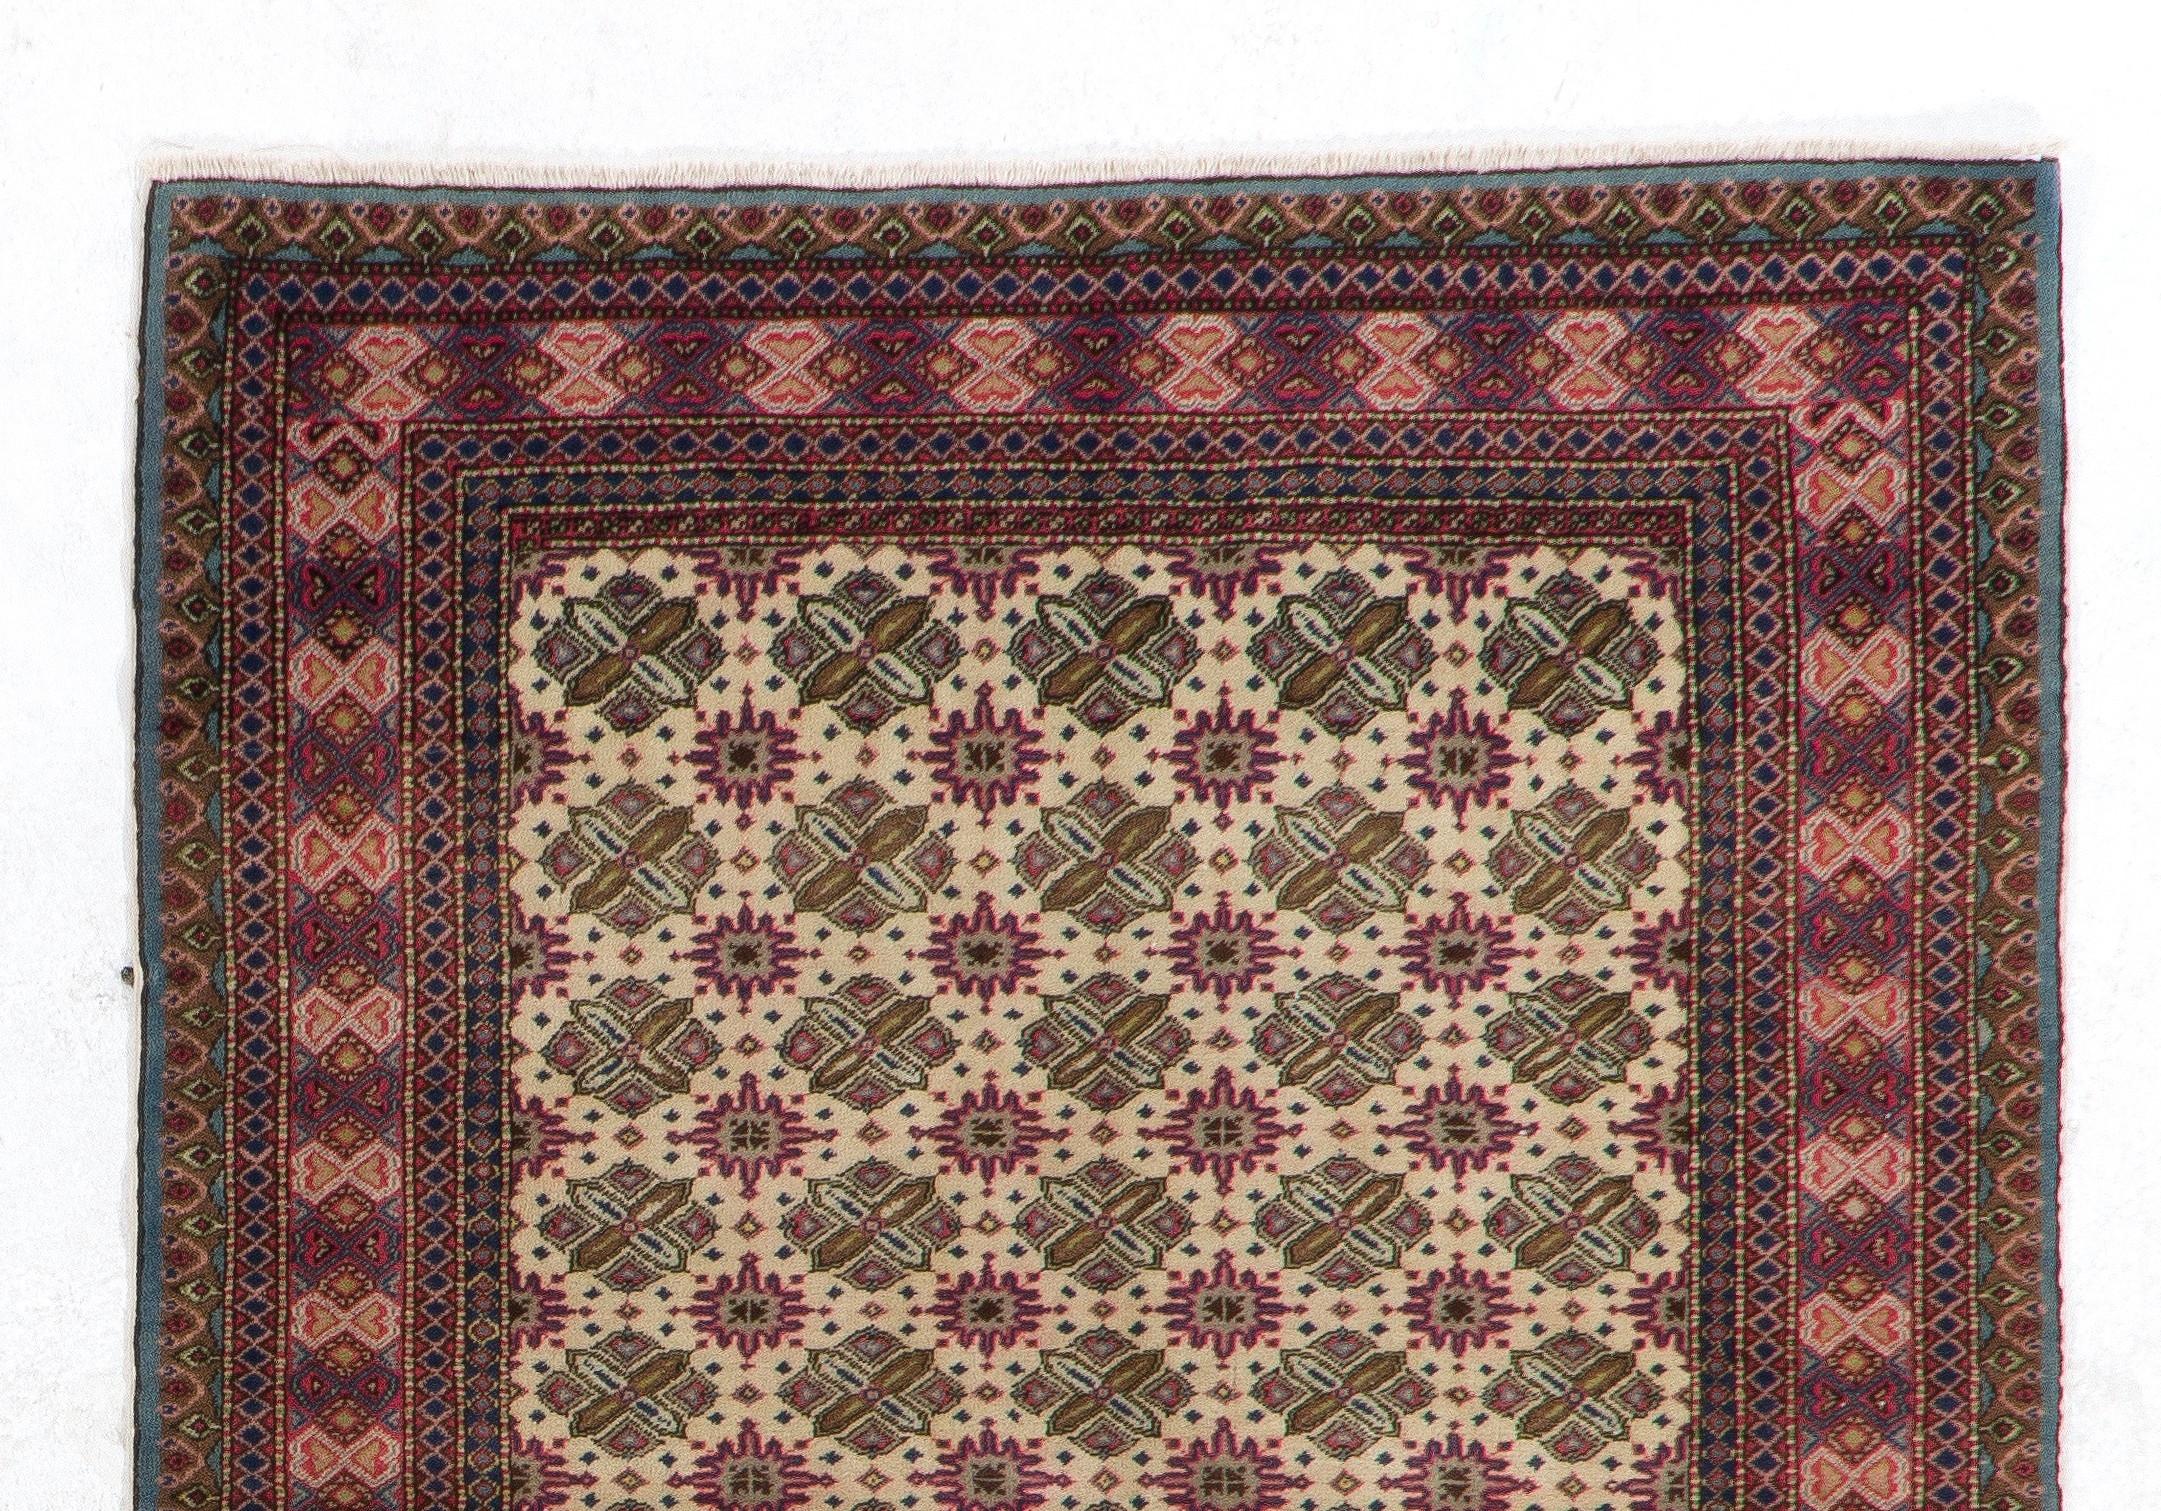 A finely hand knotted vintage Central Anatolian rug. Measures: 3.3 x 6 ft
Medium, soft wool pile on a tightly woven cotton foundation. Good condition.
It has been washed professionally and ready to be used in a residential or commercial decor.